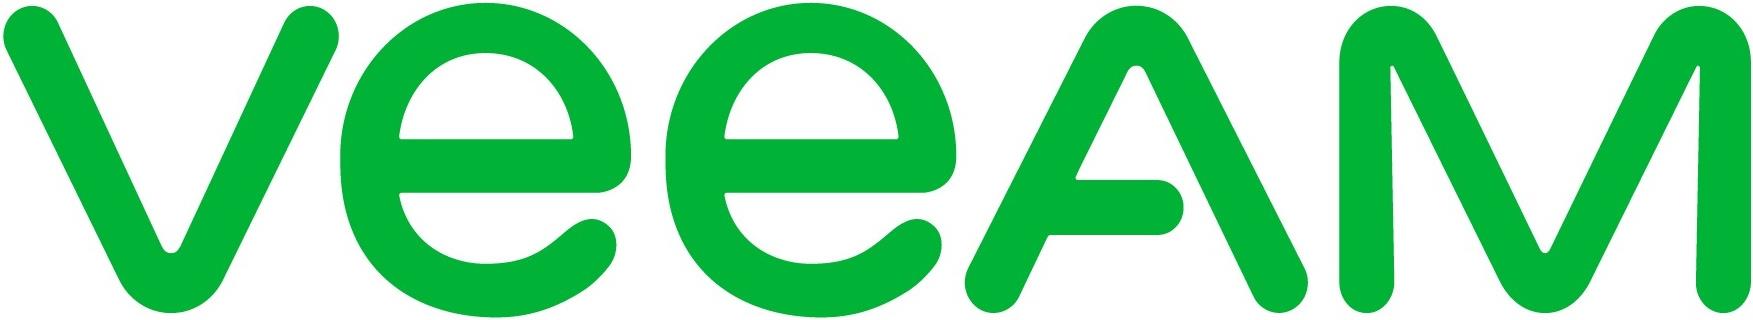 Veeam Data Platform Essentials Universal Subscription License. Includes Enterprise Plus Edition features. - 4 Years Renewal Subscription Upfront Billing & Production (24/7) Support. 40 instance pack. (V-ESSVUL-40-PS4AA-4S)